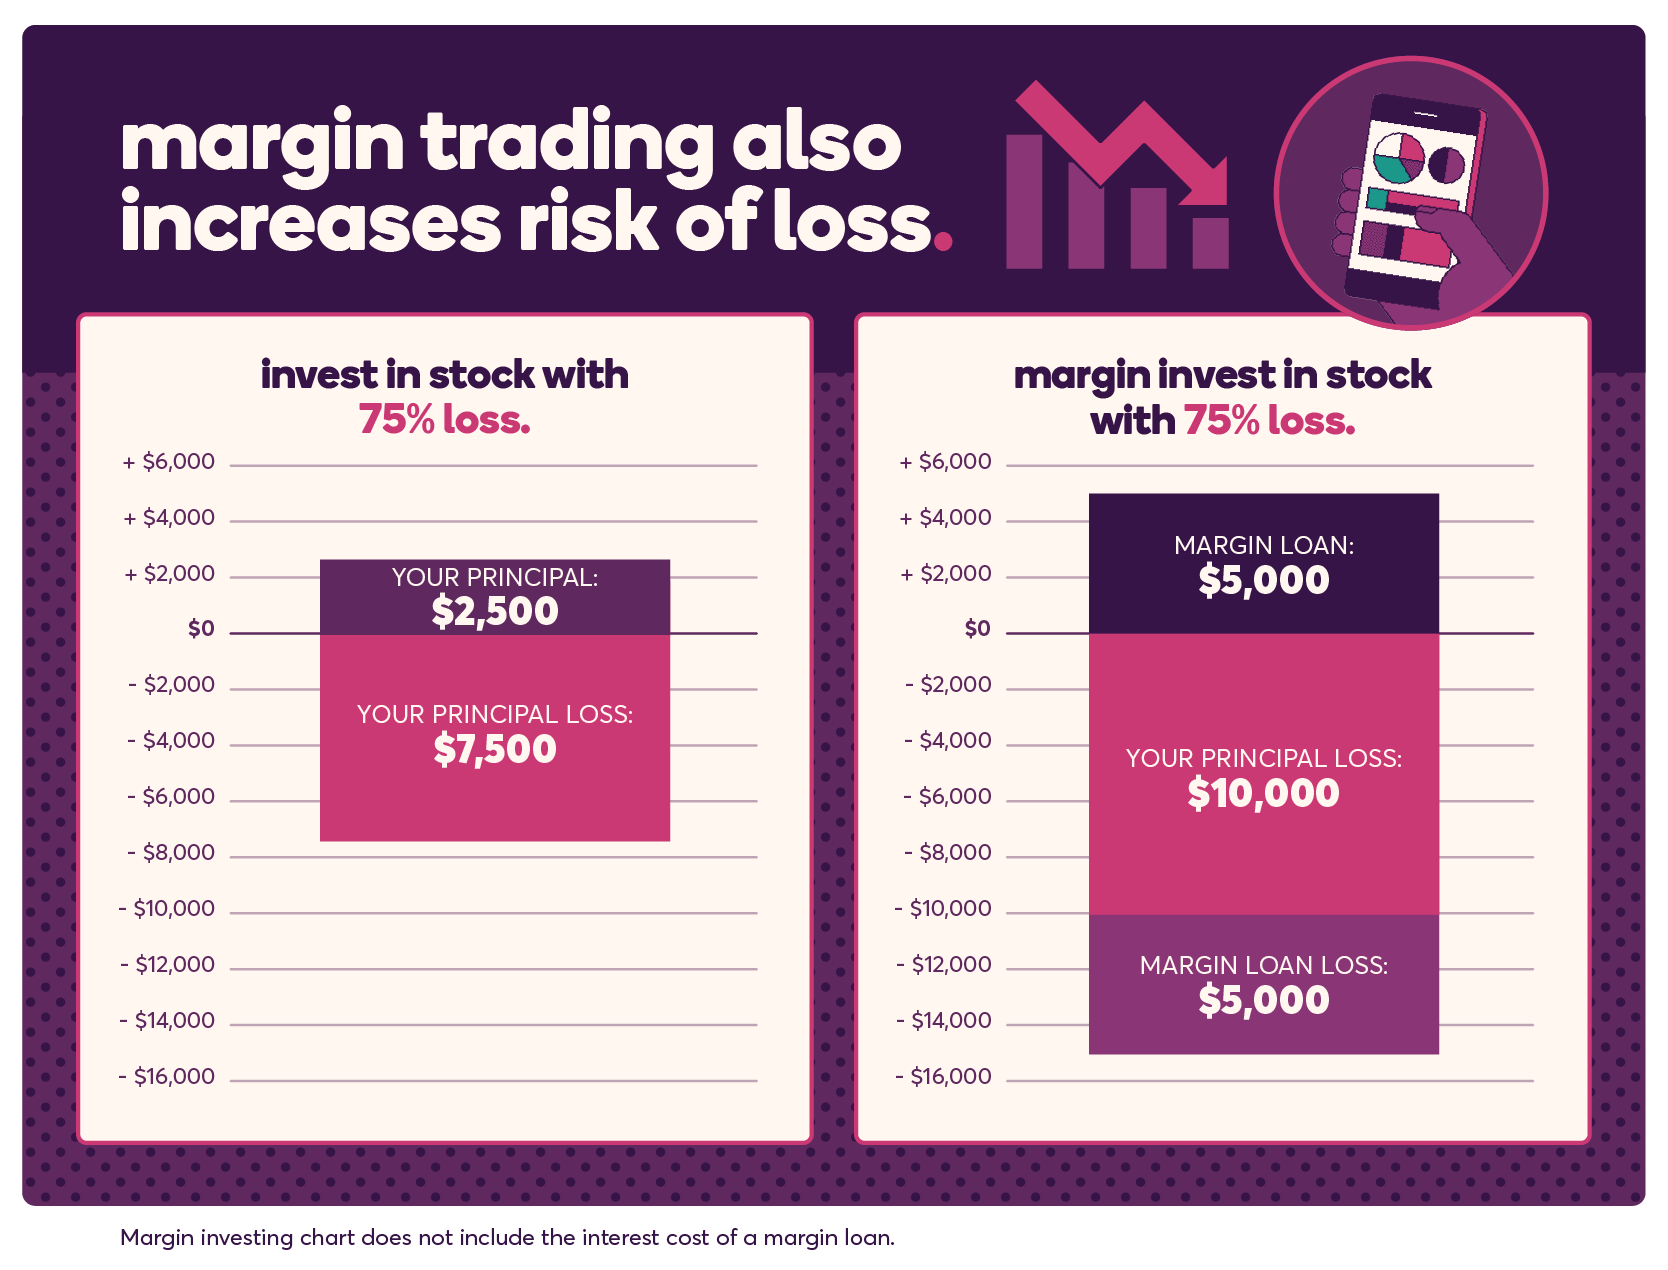 Margin trading also increases risk of loss. If you invest in stock with 75% loss, an initial principal of $10,000 will see a loss of $7,500. If you margin invest in stock with 75% loss, an initial principal of $10,000, plus a margin loan of $10,000 (for a total of $20,000) will see a total loss of $15,000. That's the full principal of $10,000 plus $5,000 of the margin loan. This example does not include the interest cost of a margin loan.